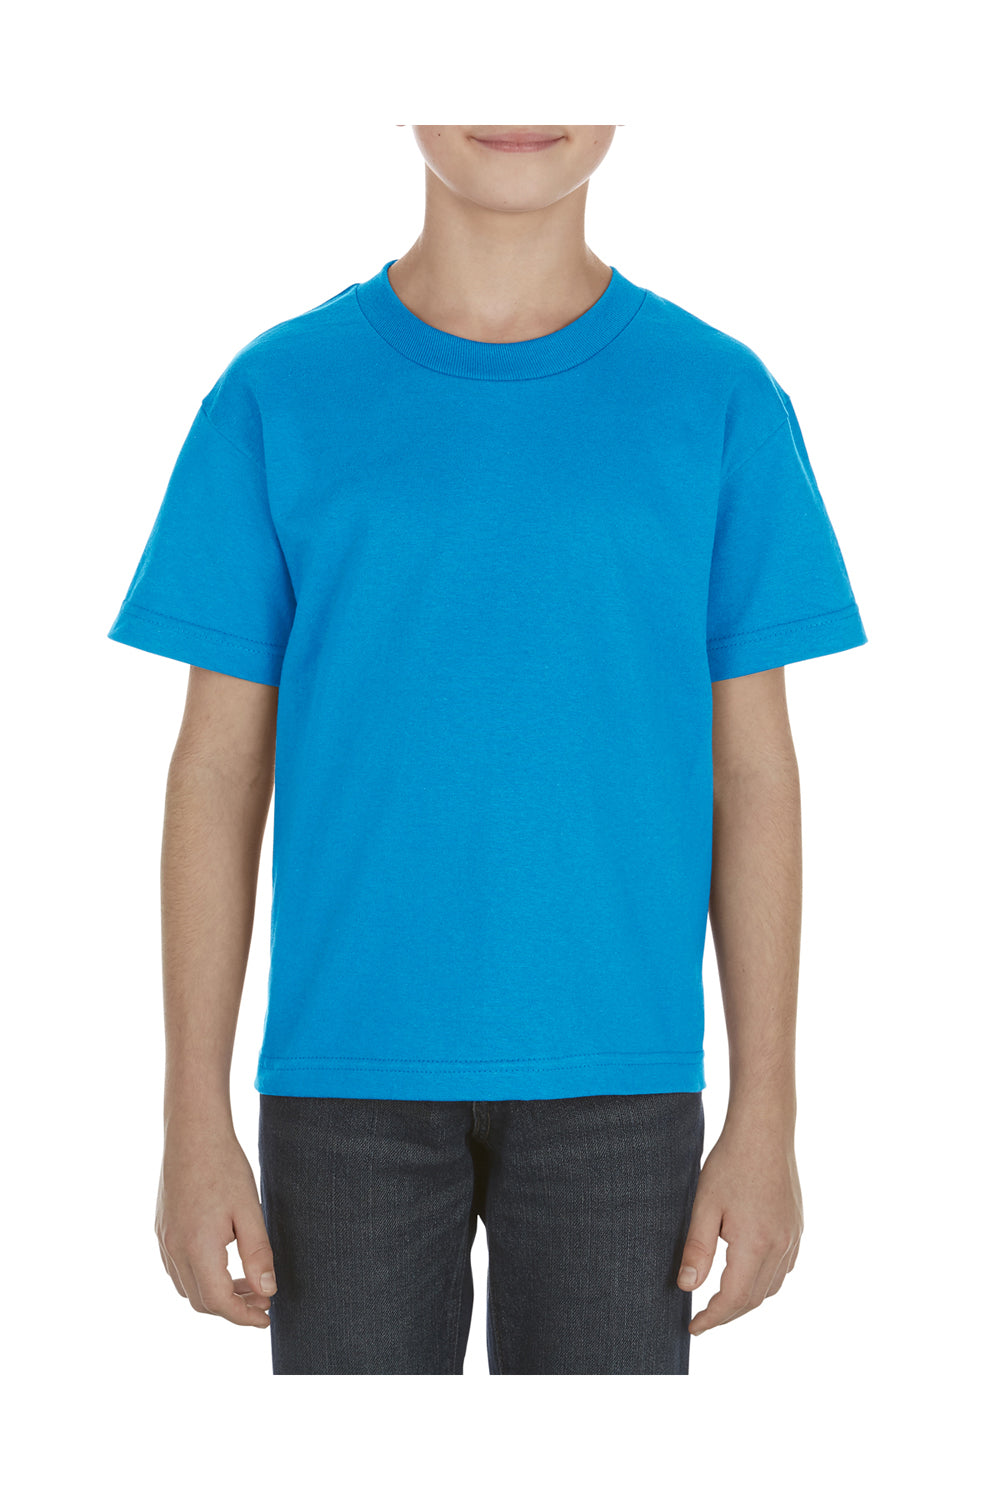 Alstyle AL3381 Youth Short Sleeve Crewneck T-Shirt Turquoise Blue Front